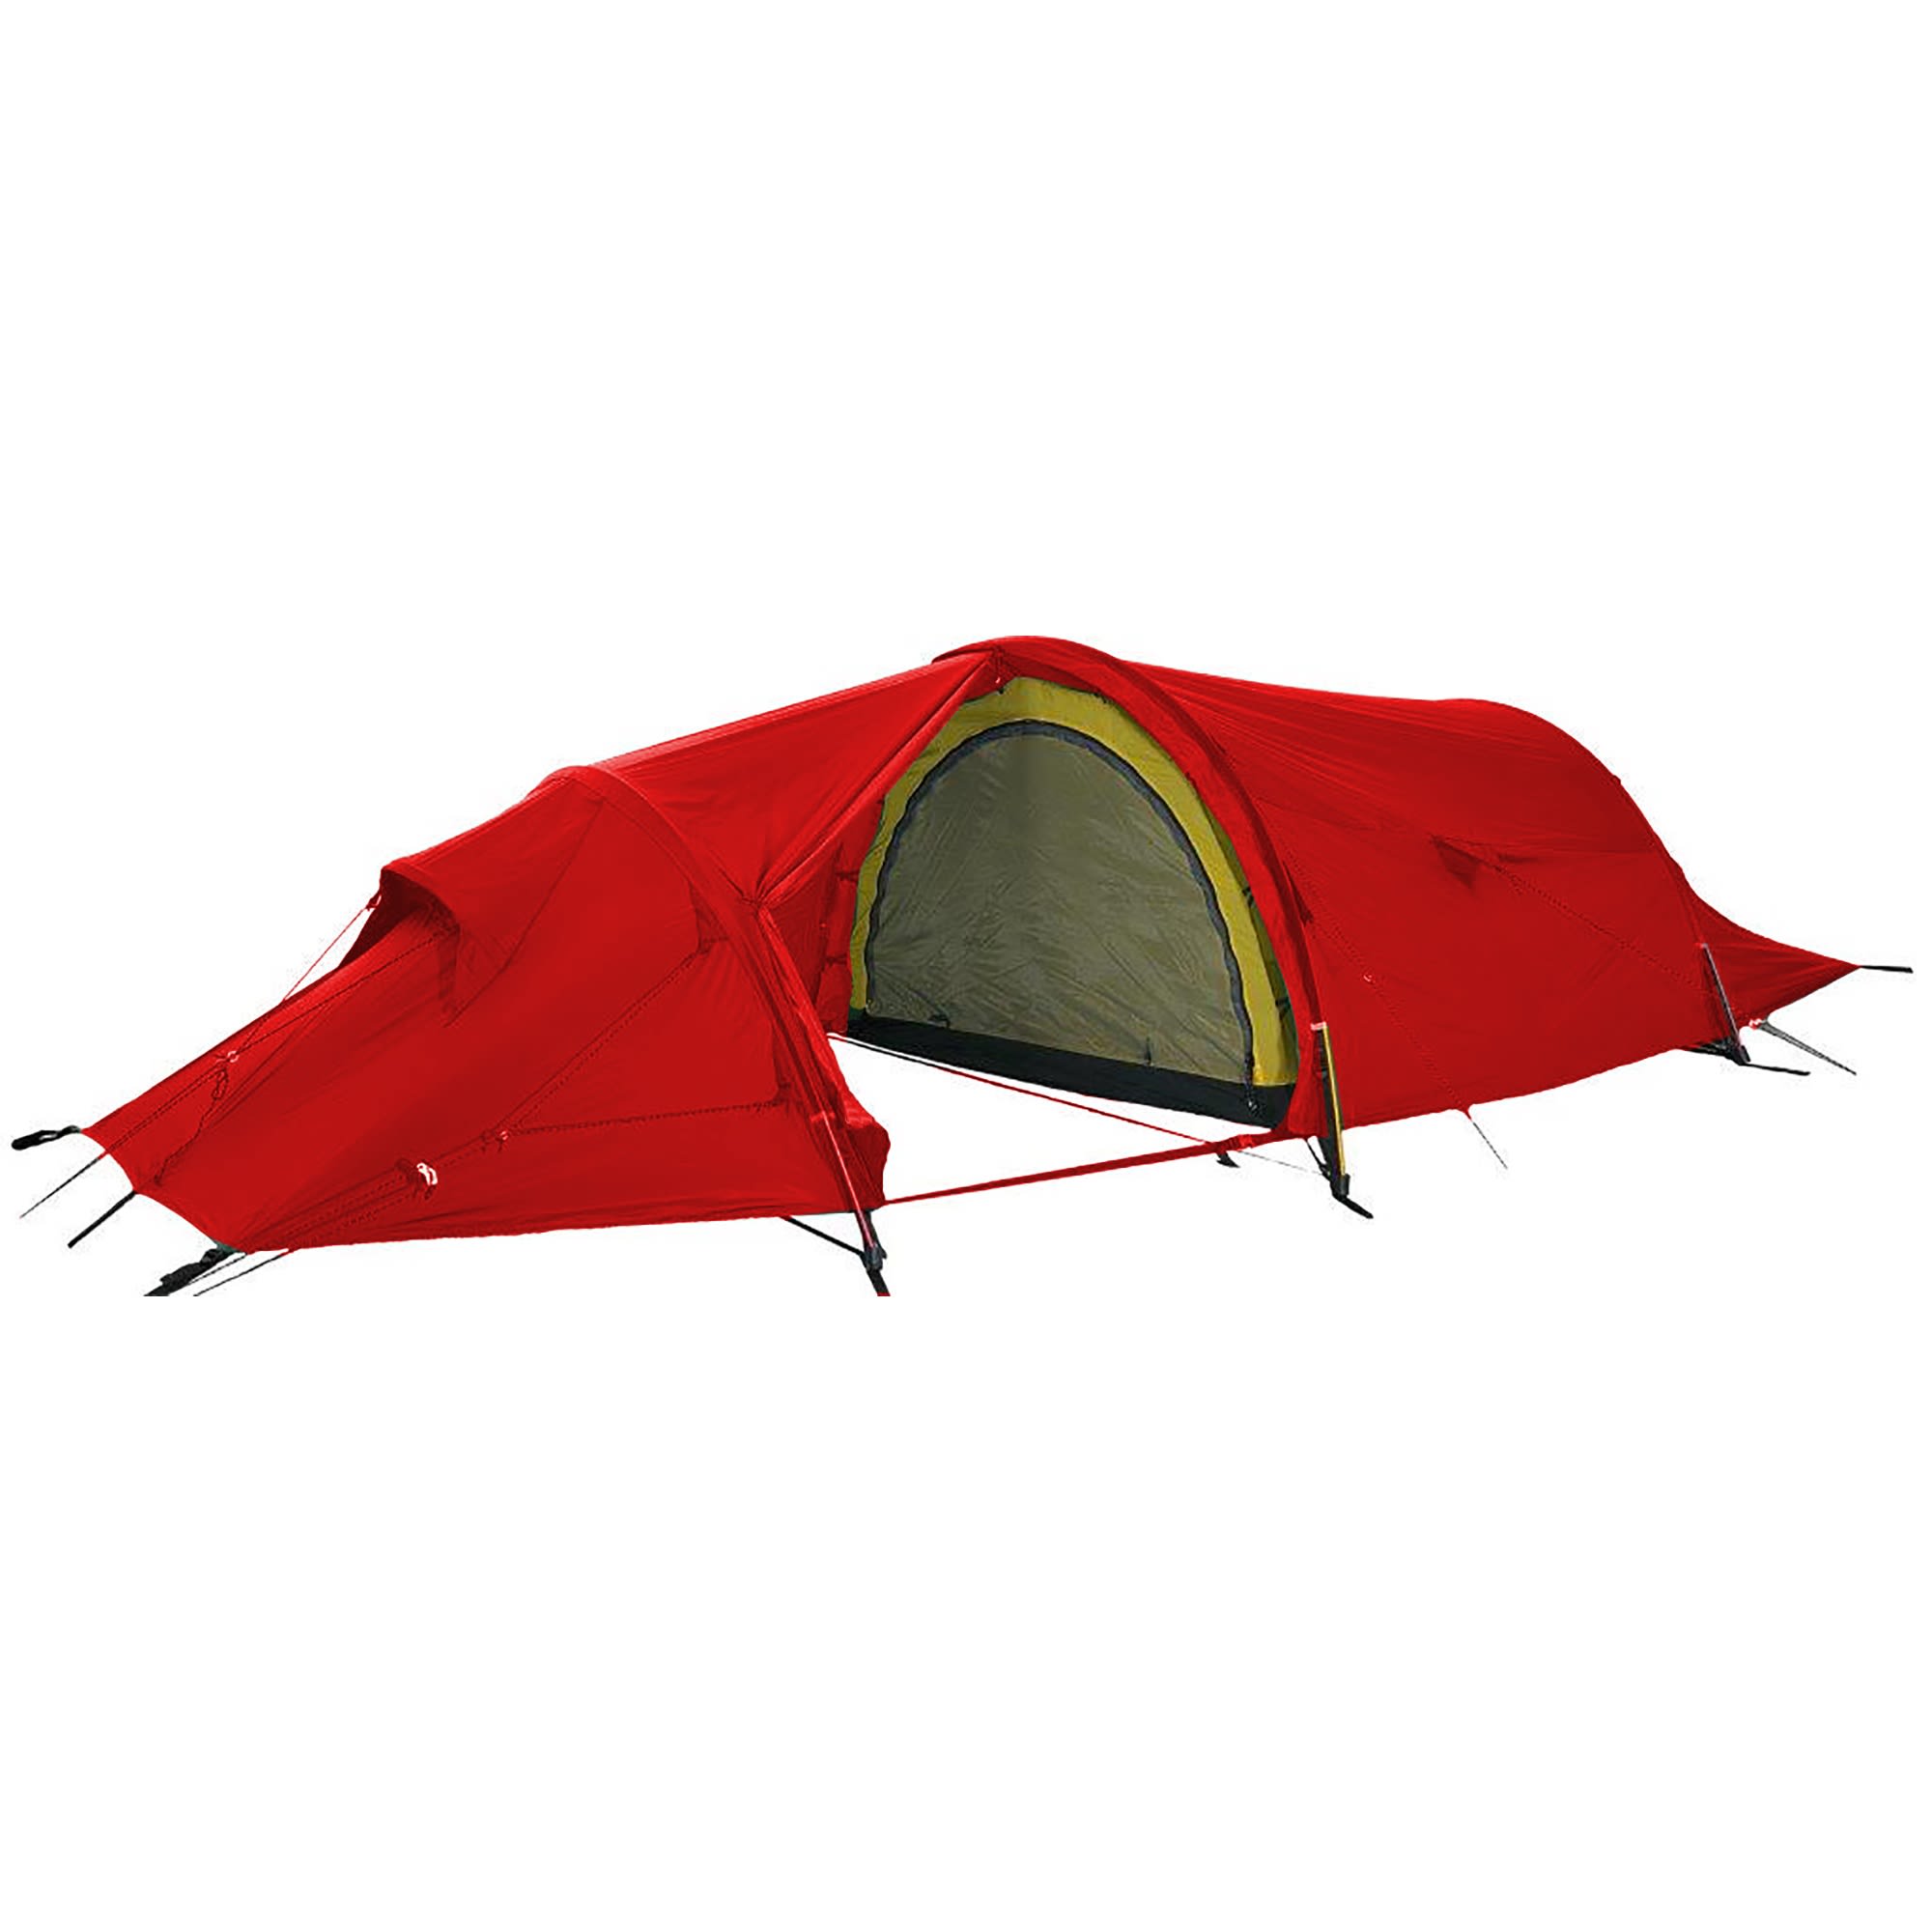 wasmiddel site Vernauwd Buy Bergans Trillemarka 3-pers Tent from Outnorth